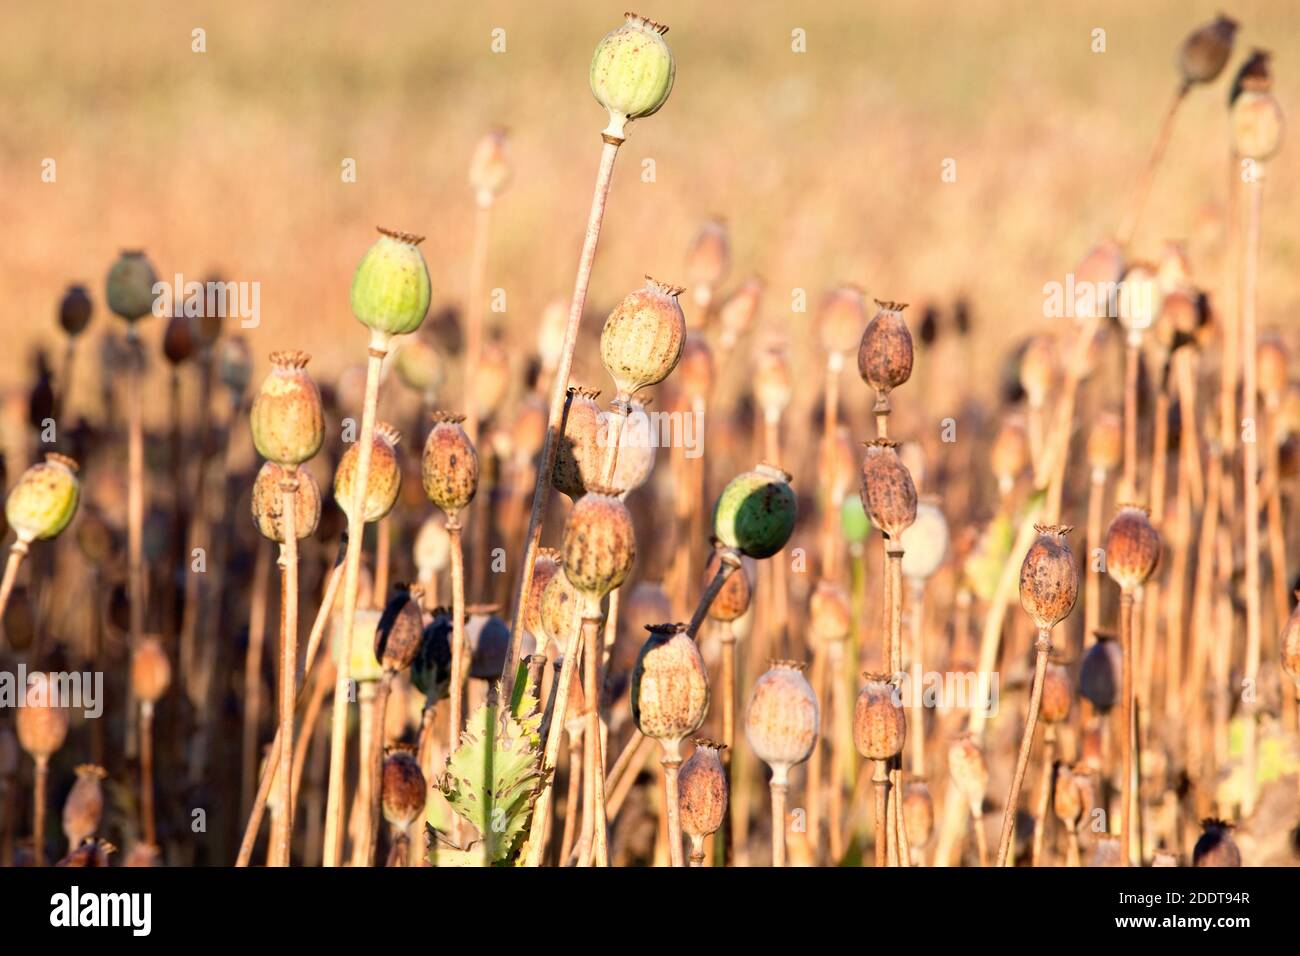 South Bohemia - Field of seedheads of poppies. Stock Photo